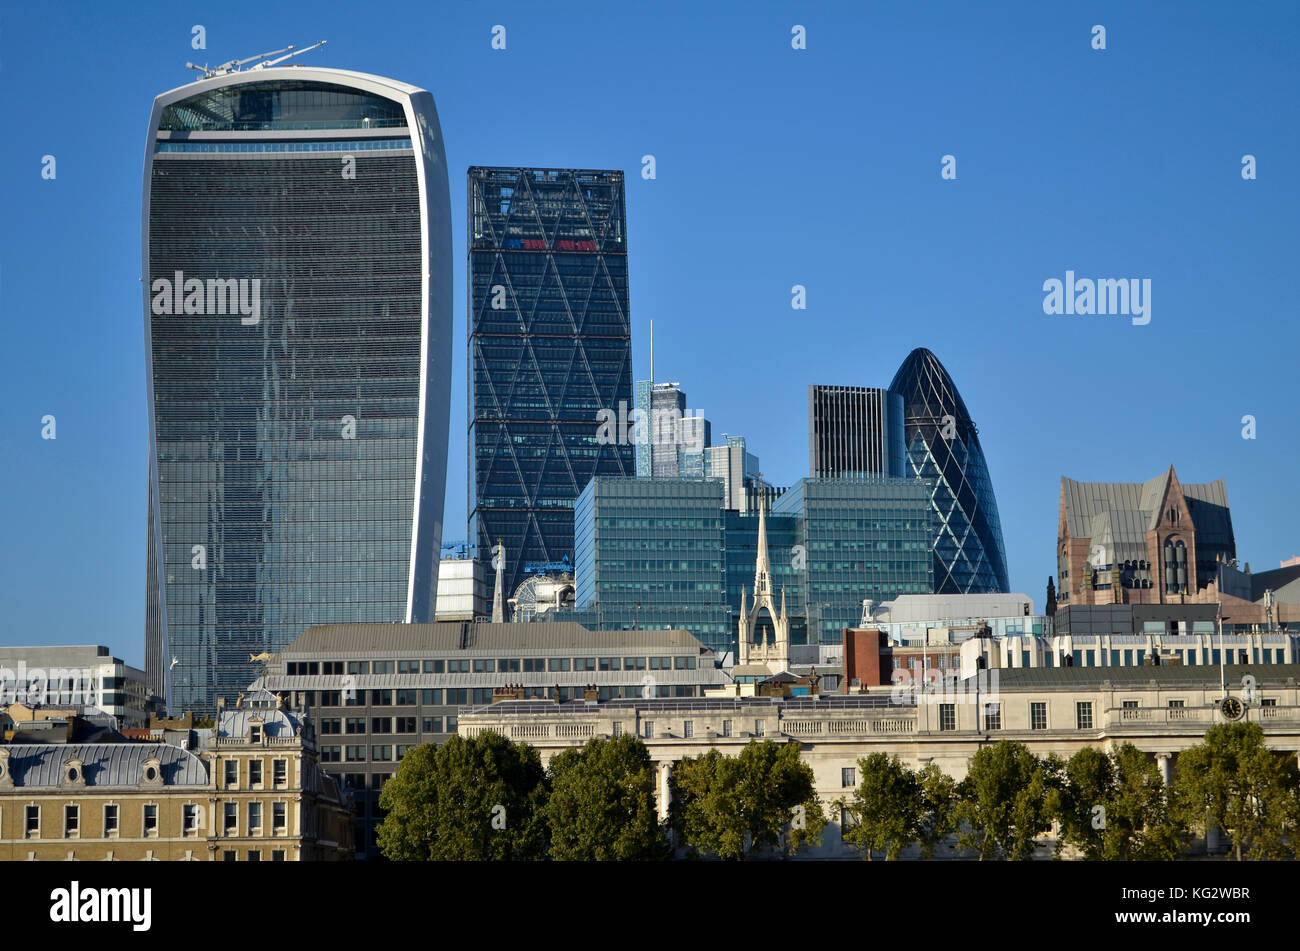 Financial District, London, UK. 20 Fenchurch Street, Leadenhall Building, Gherkin, Minster Court all visible. Stock Photo